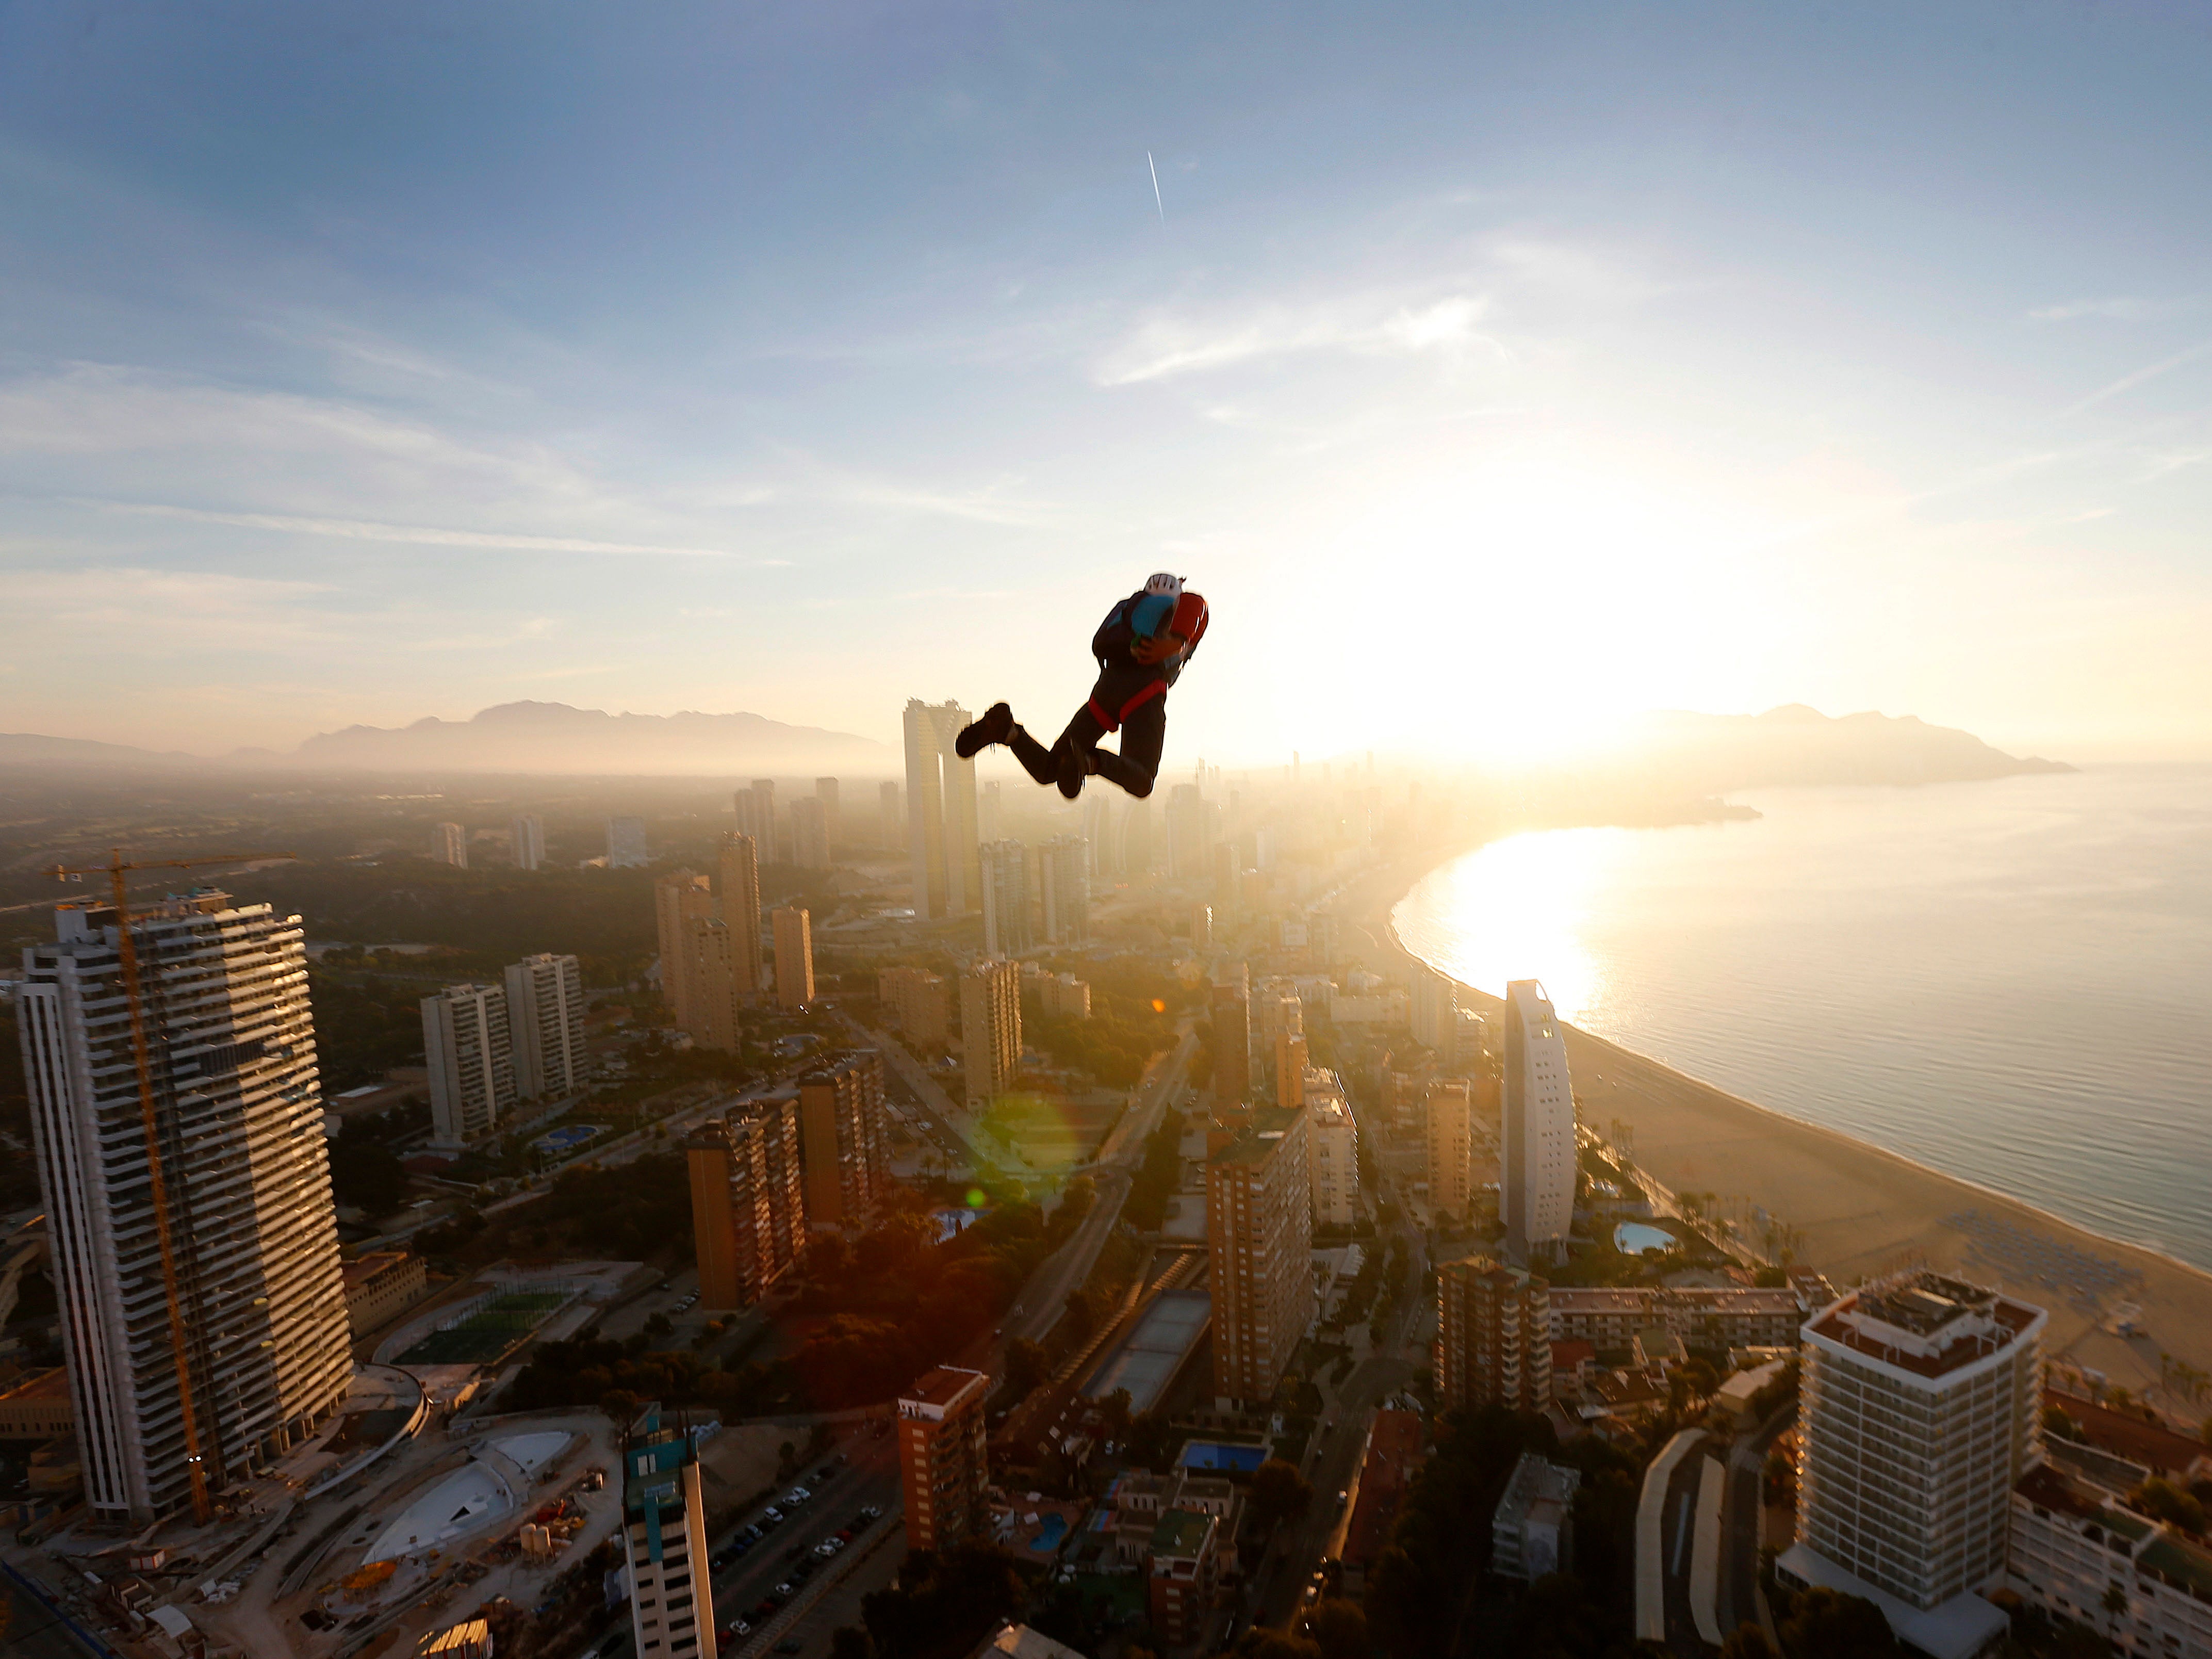 A base jumper in action during the BASE Jump Extreme World Championship at Gran Hotel Bali in Benidorm, Spain